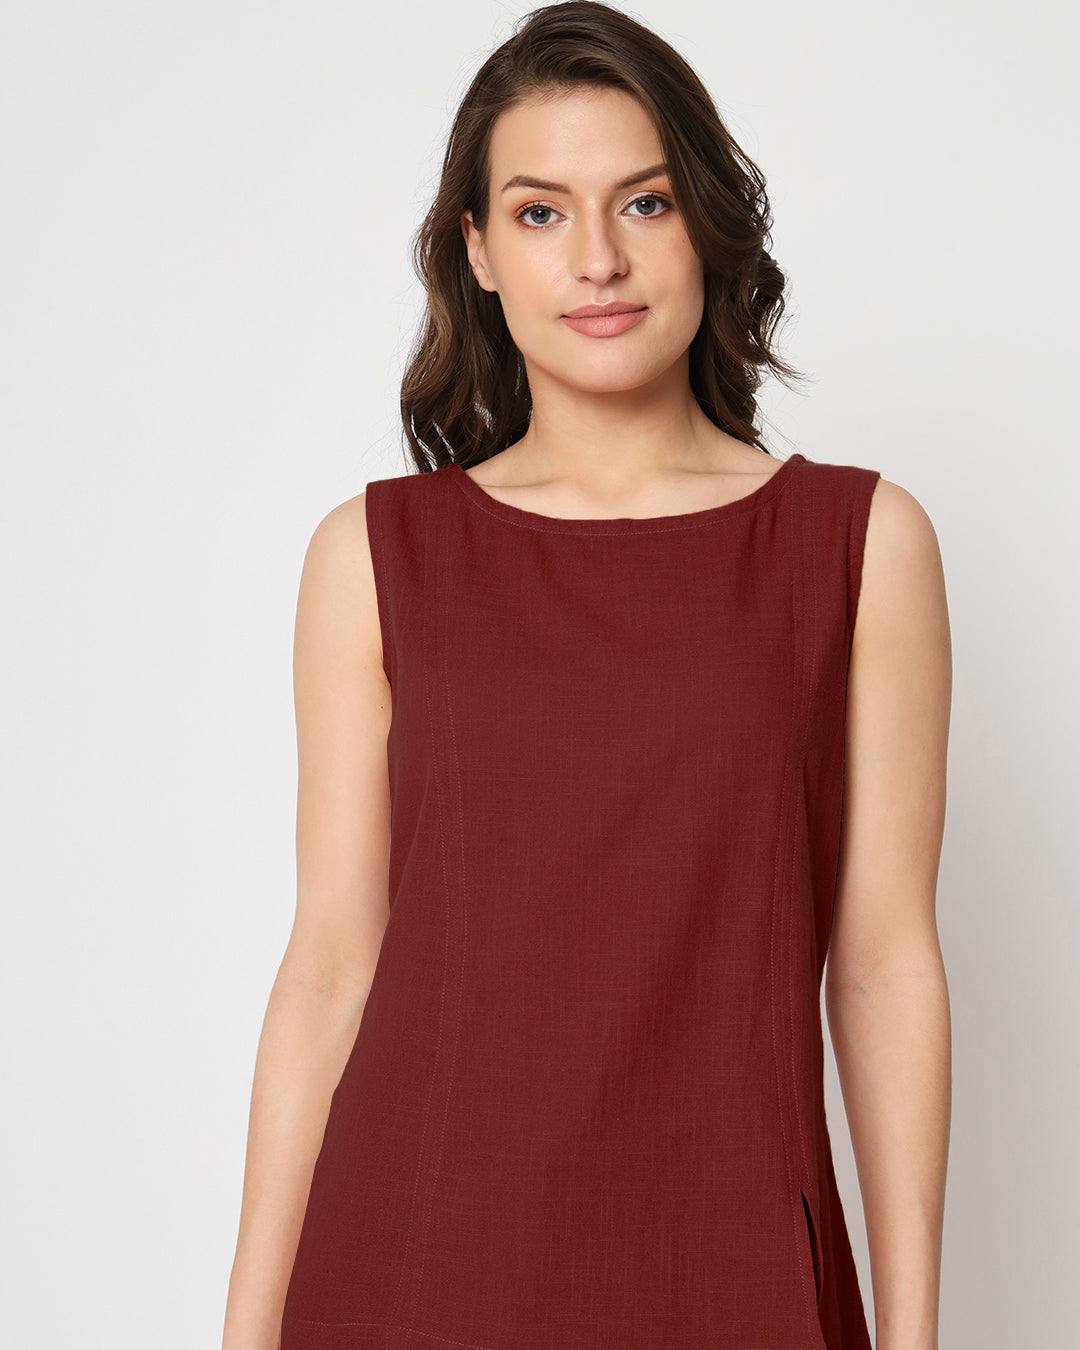 Russet Red Sleeveless Short Length Solid Top (Without Bottoms)